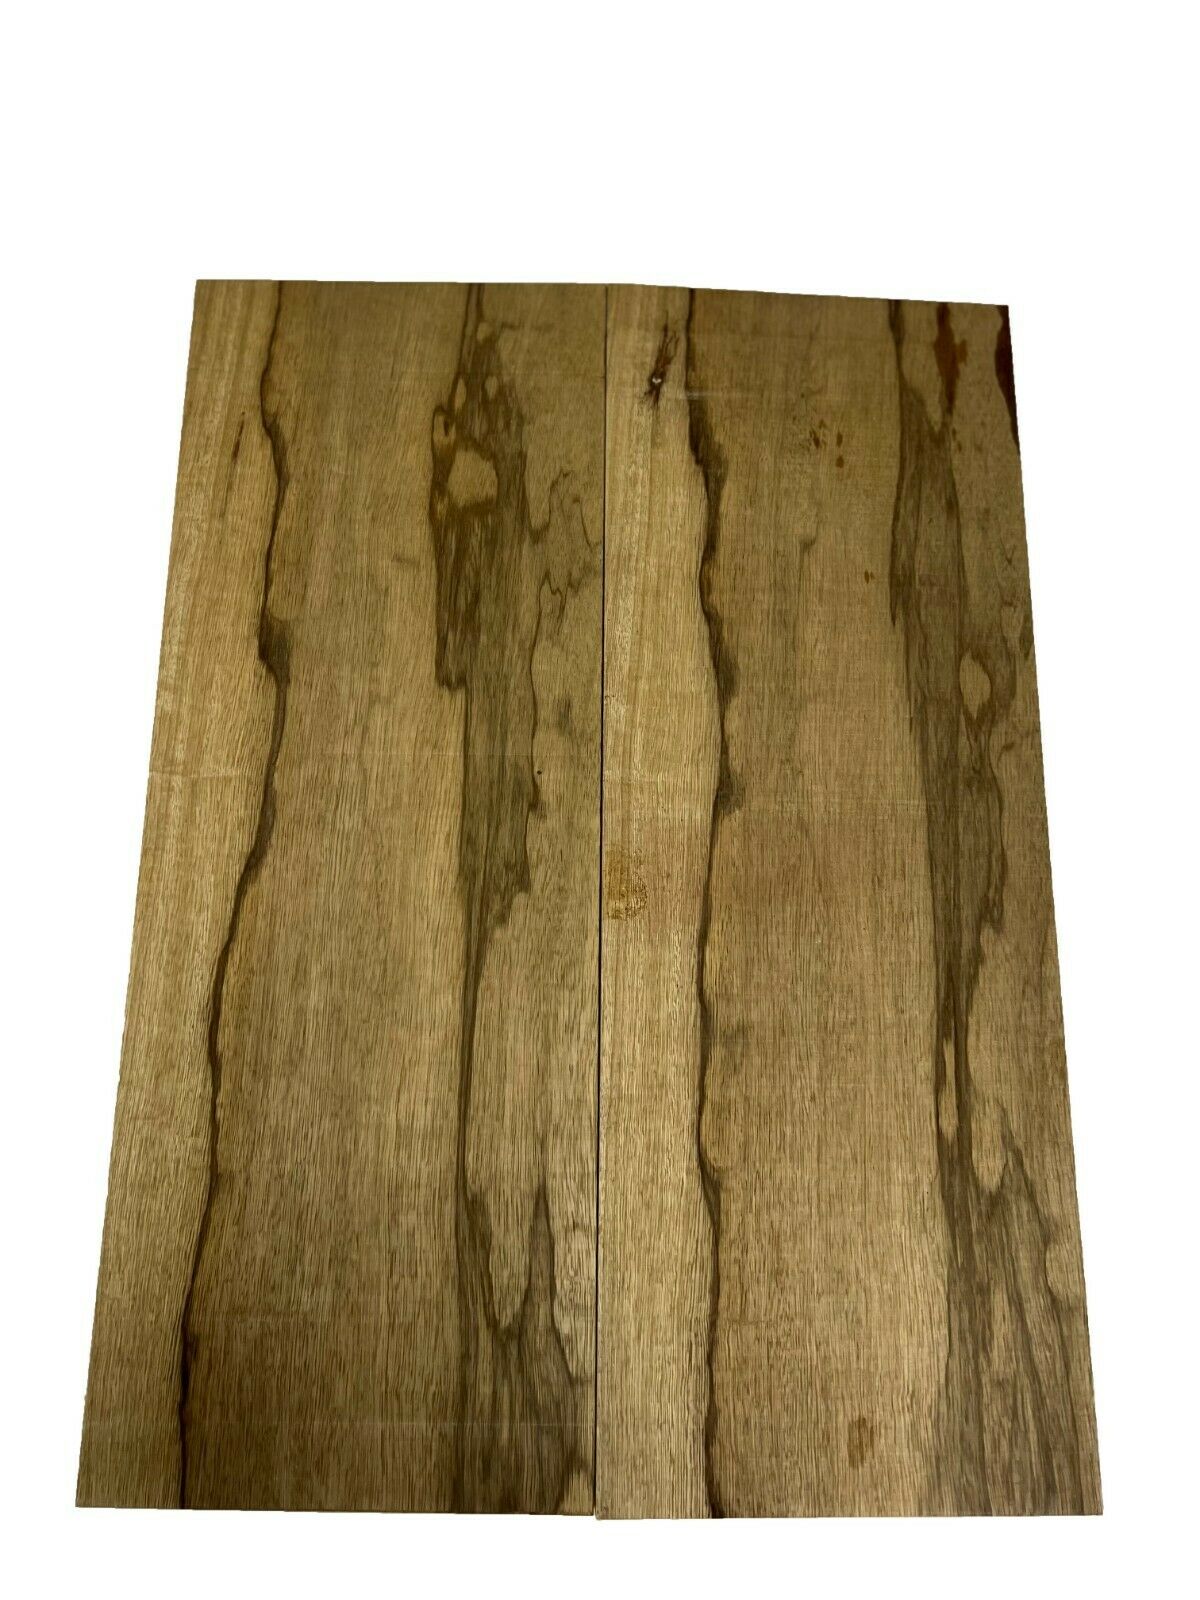 Black Limba Electric Guitar Carved Tops/Plates | 21” x 7” x 5/8” | Book Matched Sets - Exotic Wood Zone - Buy online Across USA